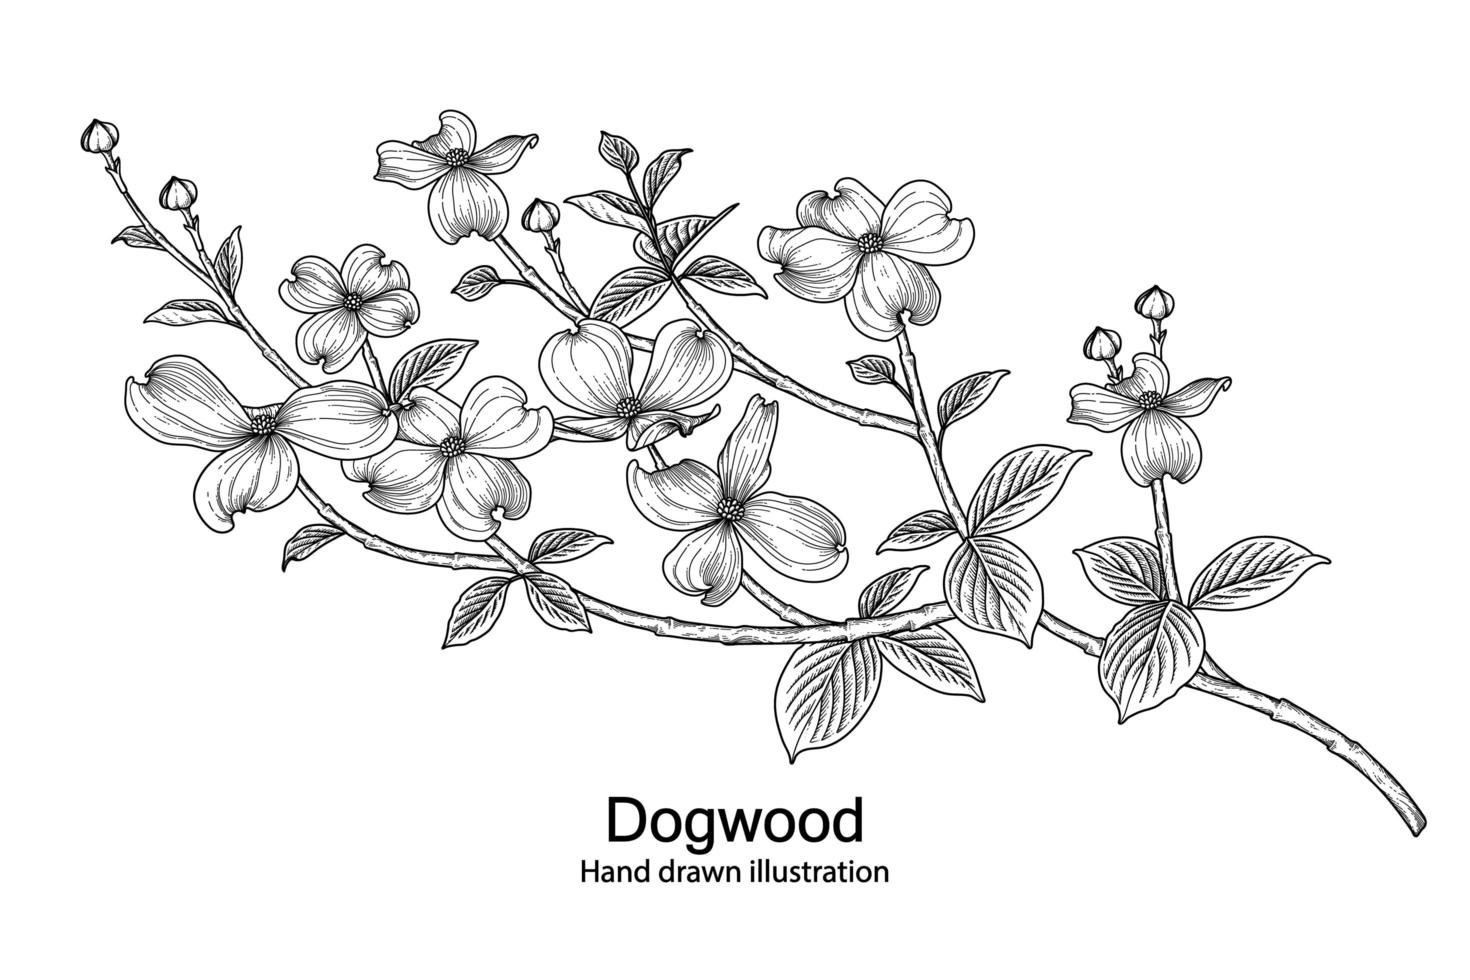 Branch of Dogwood with flower and leaves Hand Drawn Sketch Botanical Illustrations vector